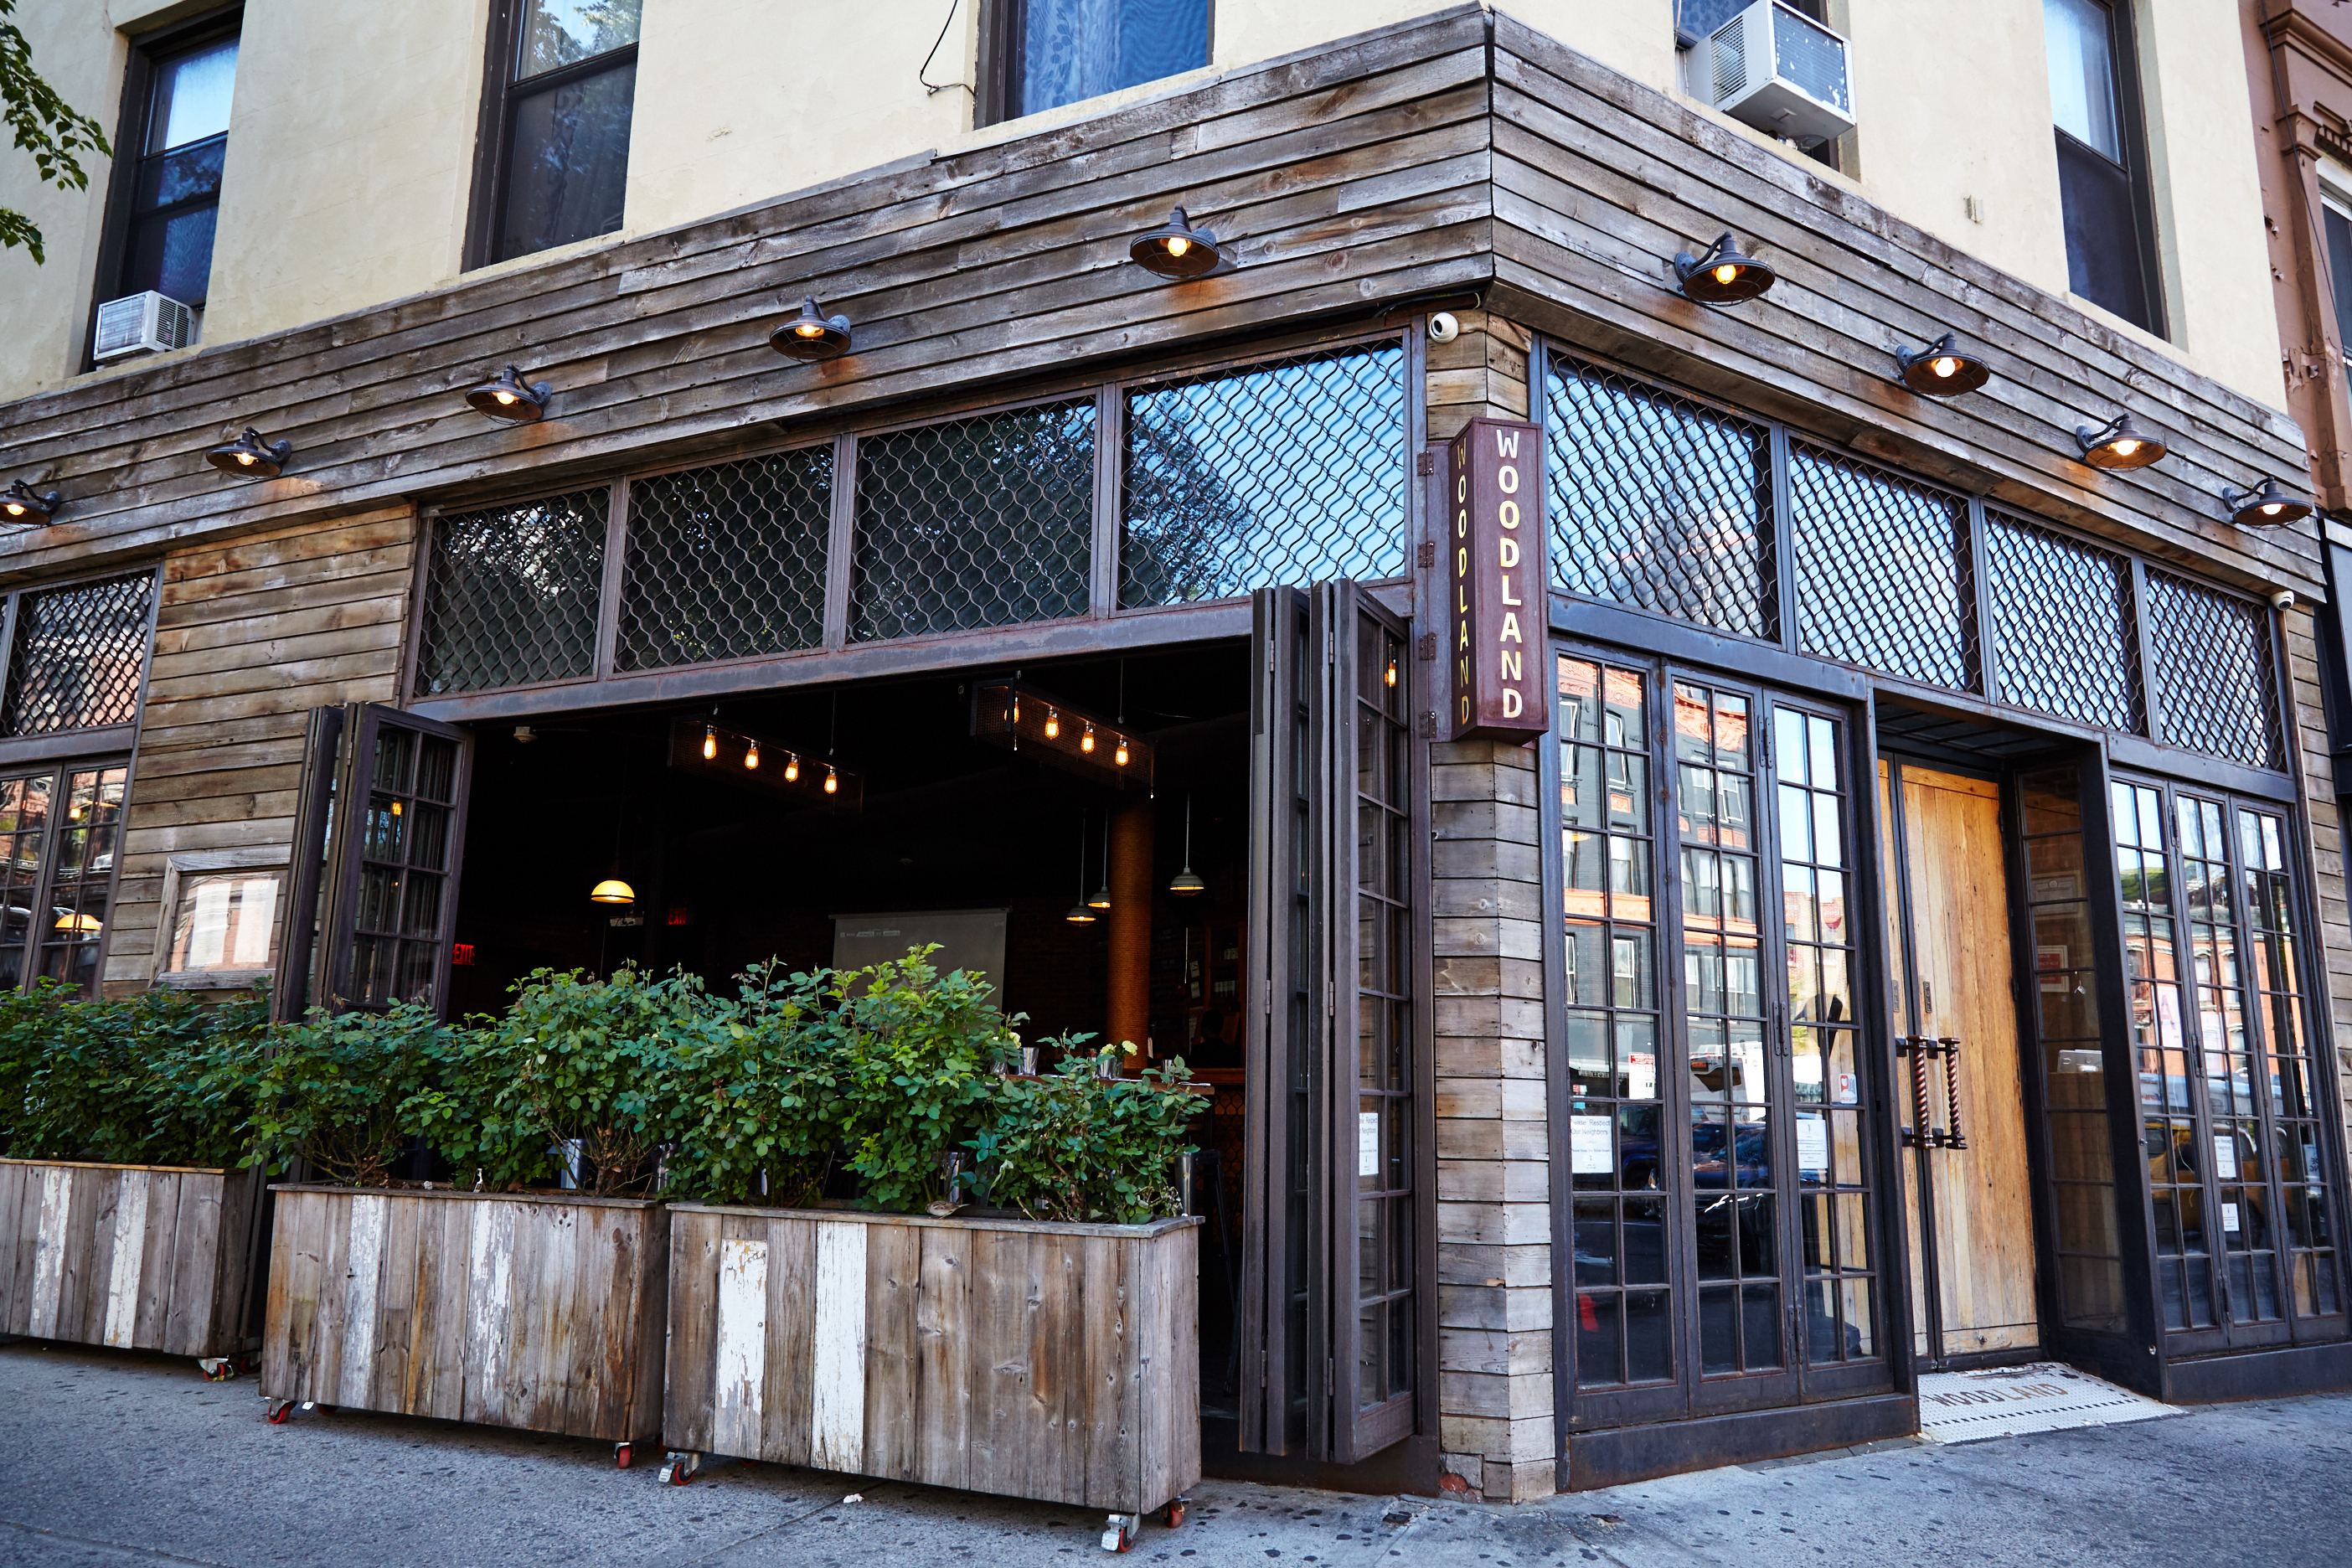 The exterior of woodland bar in park slope shows dark wooden frames, large glass windows and doors, and planters